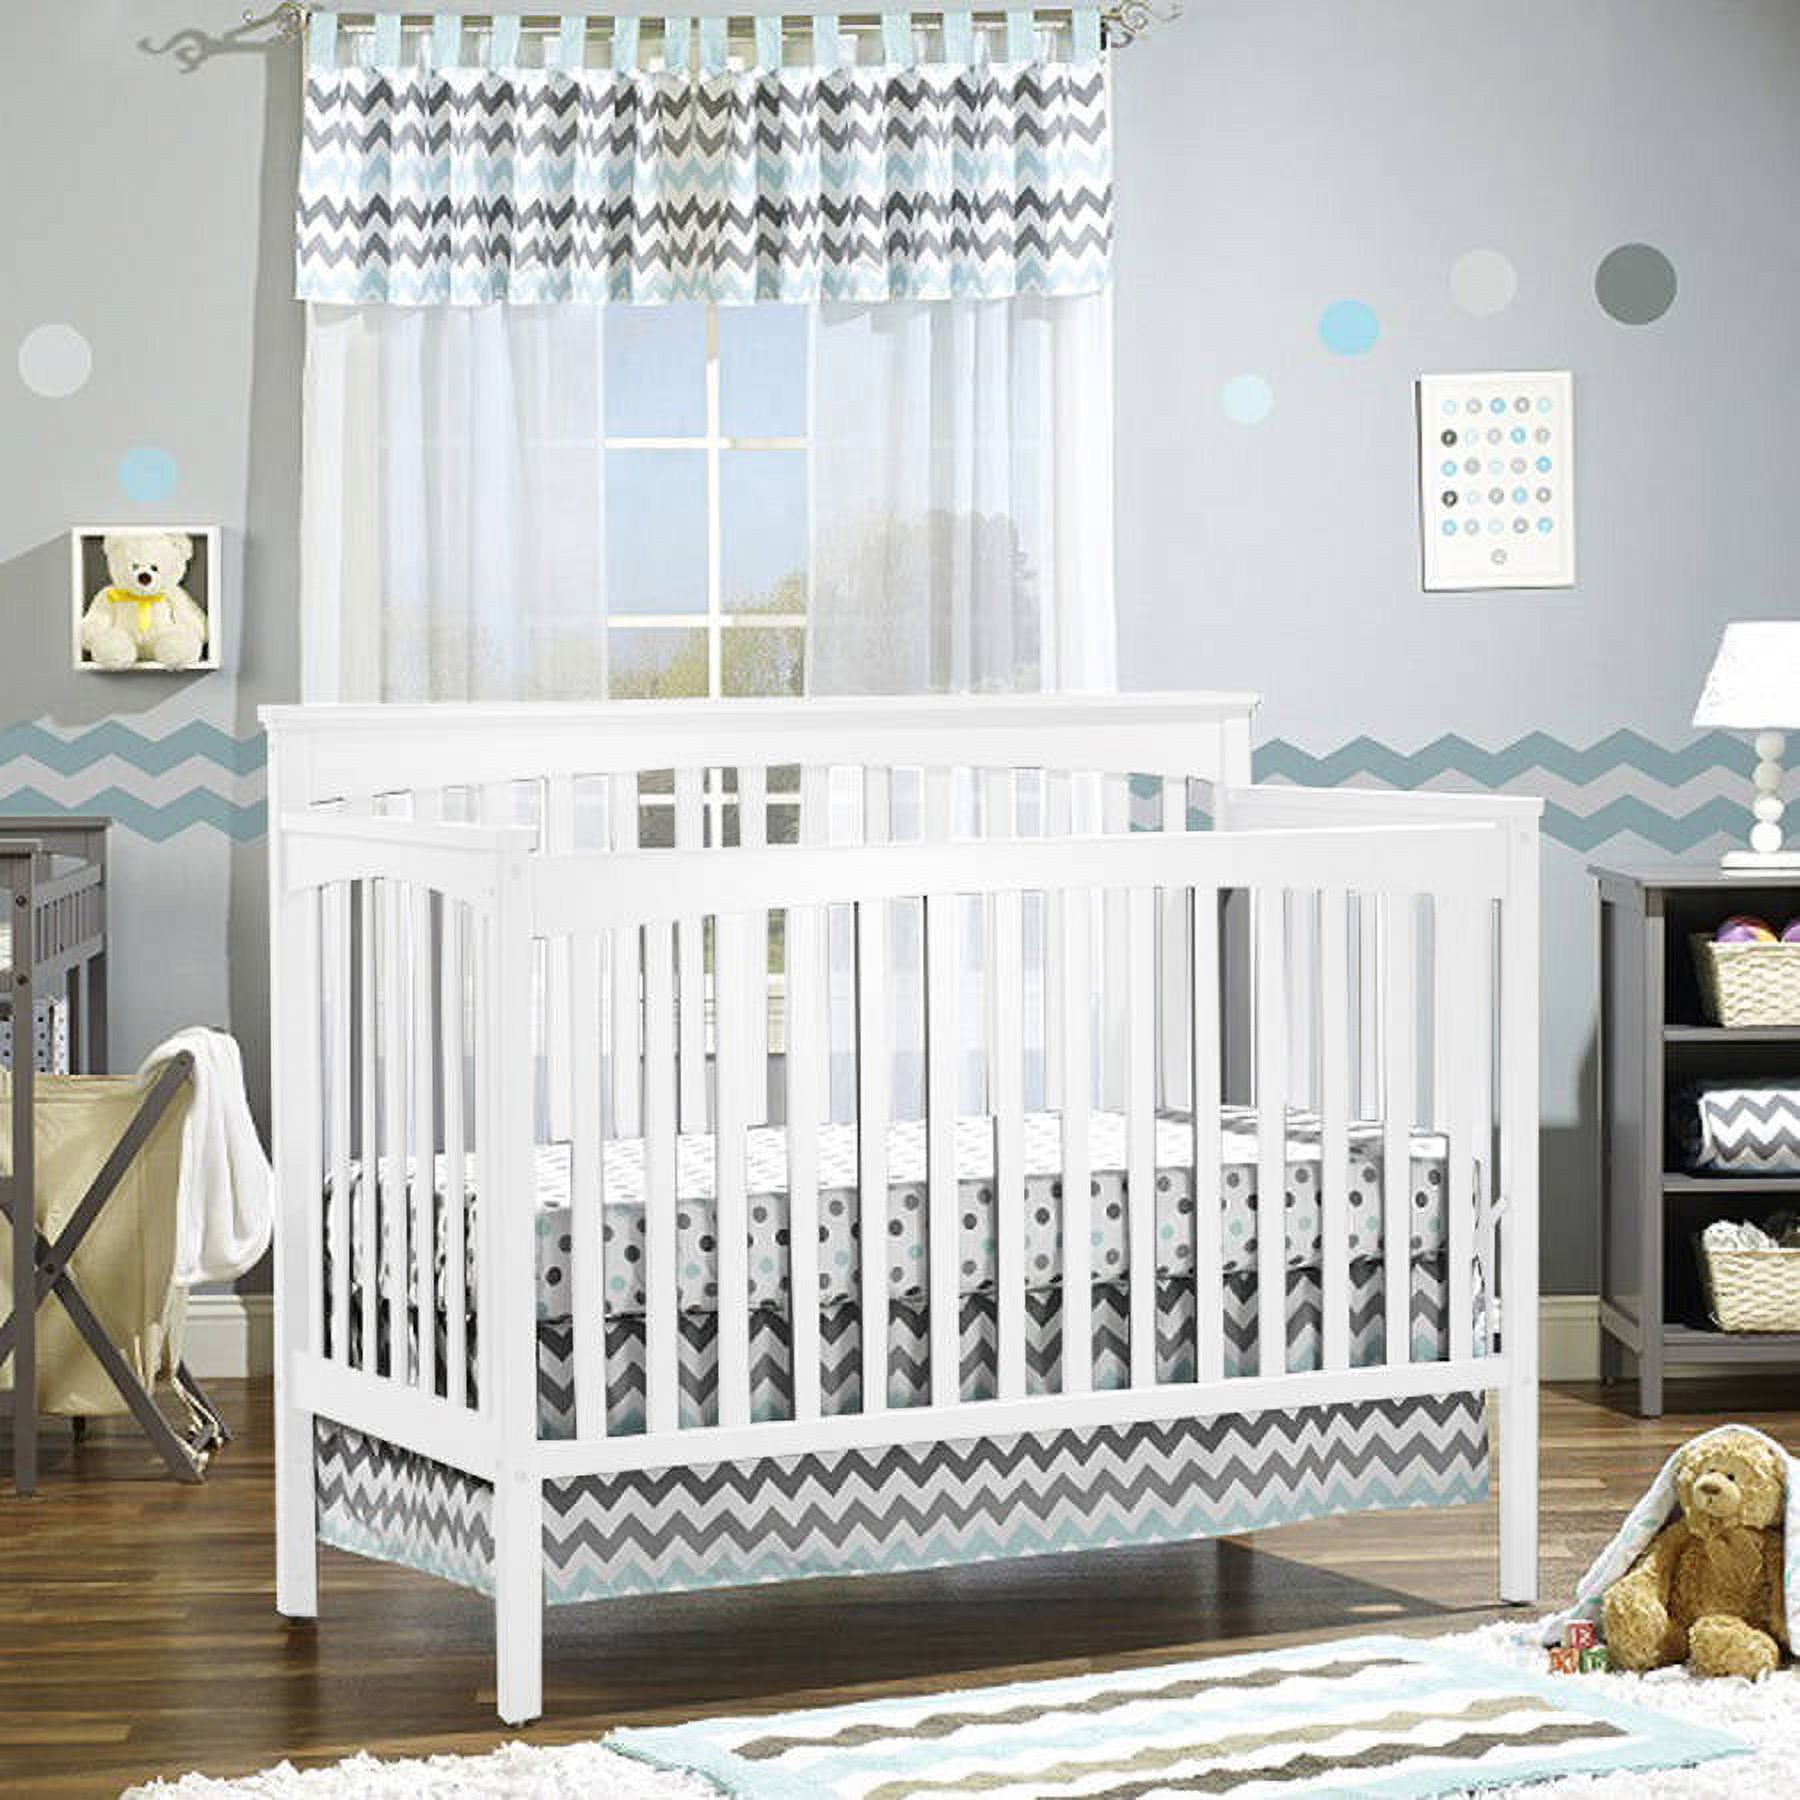 Sorelle Petite Paradise Elite 4-in-1 Crib, Changing Table and Organizer/Storage Unit, Choose Your Finish - image 1 of 1